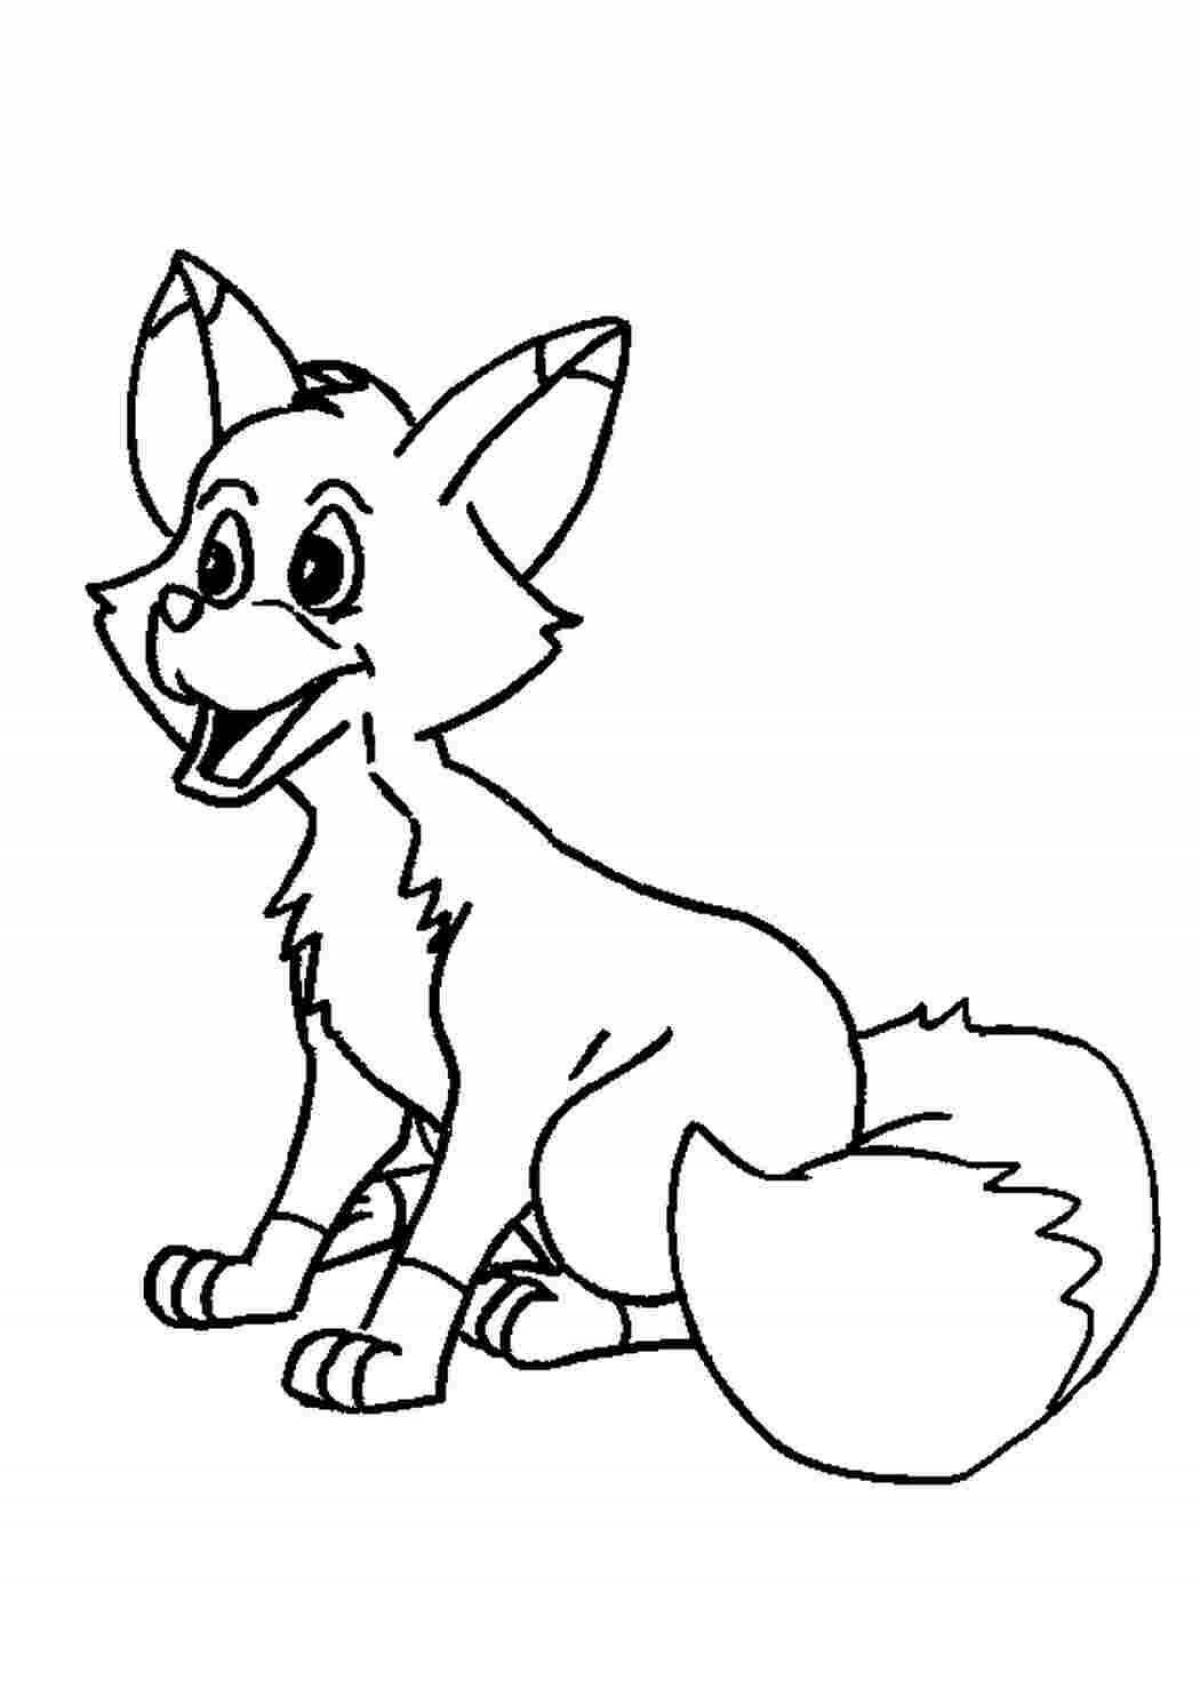 Sparkling fox coloring book for kids